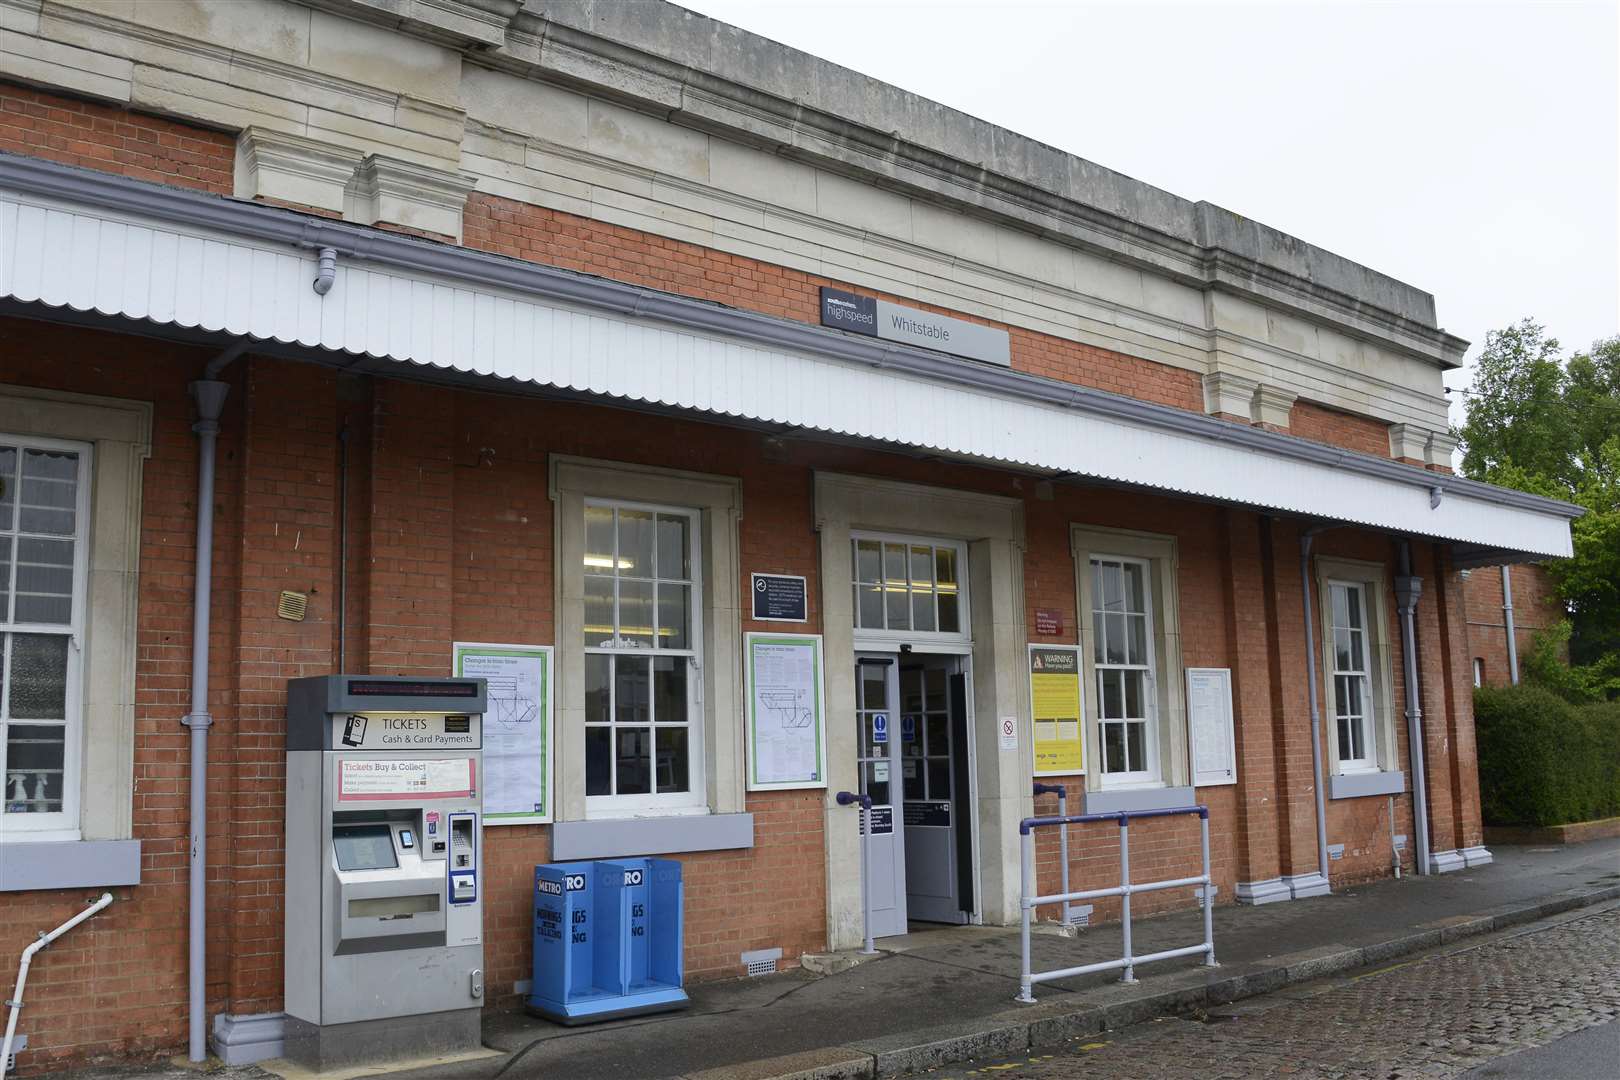 The incident took place at Whitstable railway station this morning